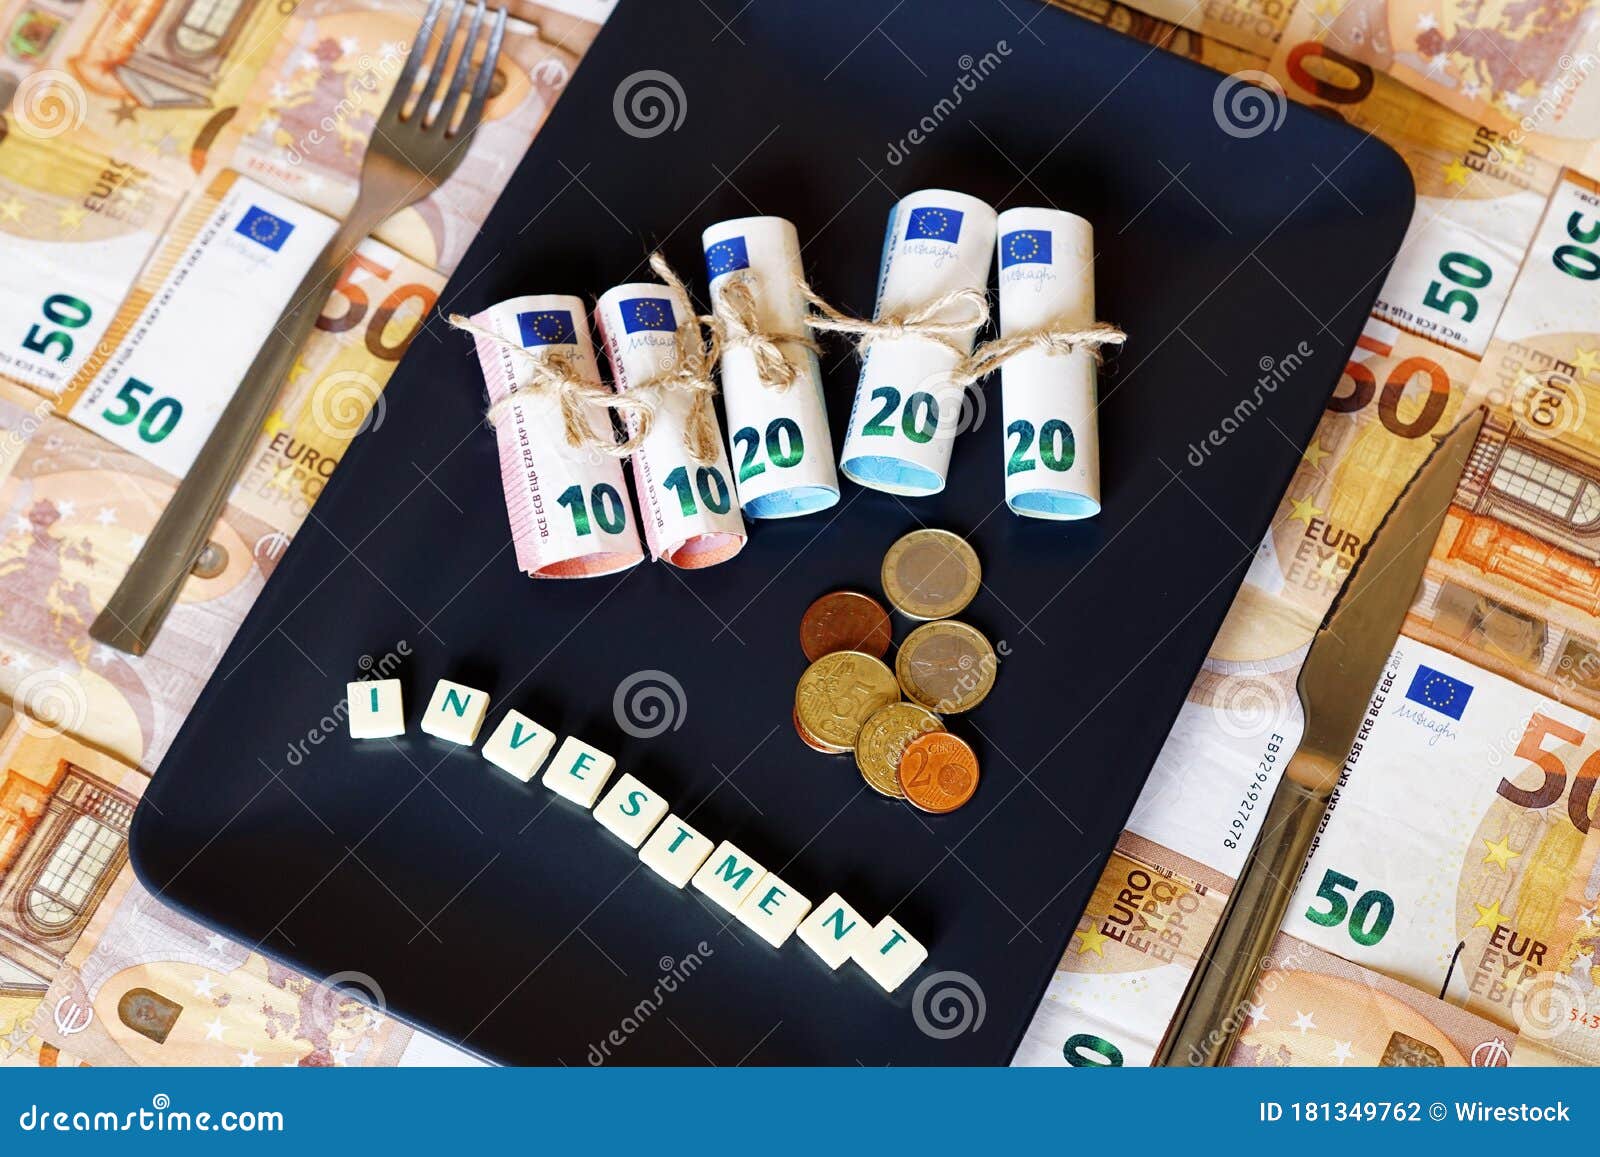 high angle shot of dinero money bills in a plate with a fork and white cubes spelling investment